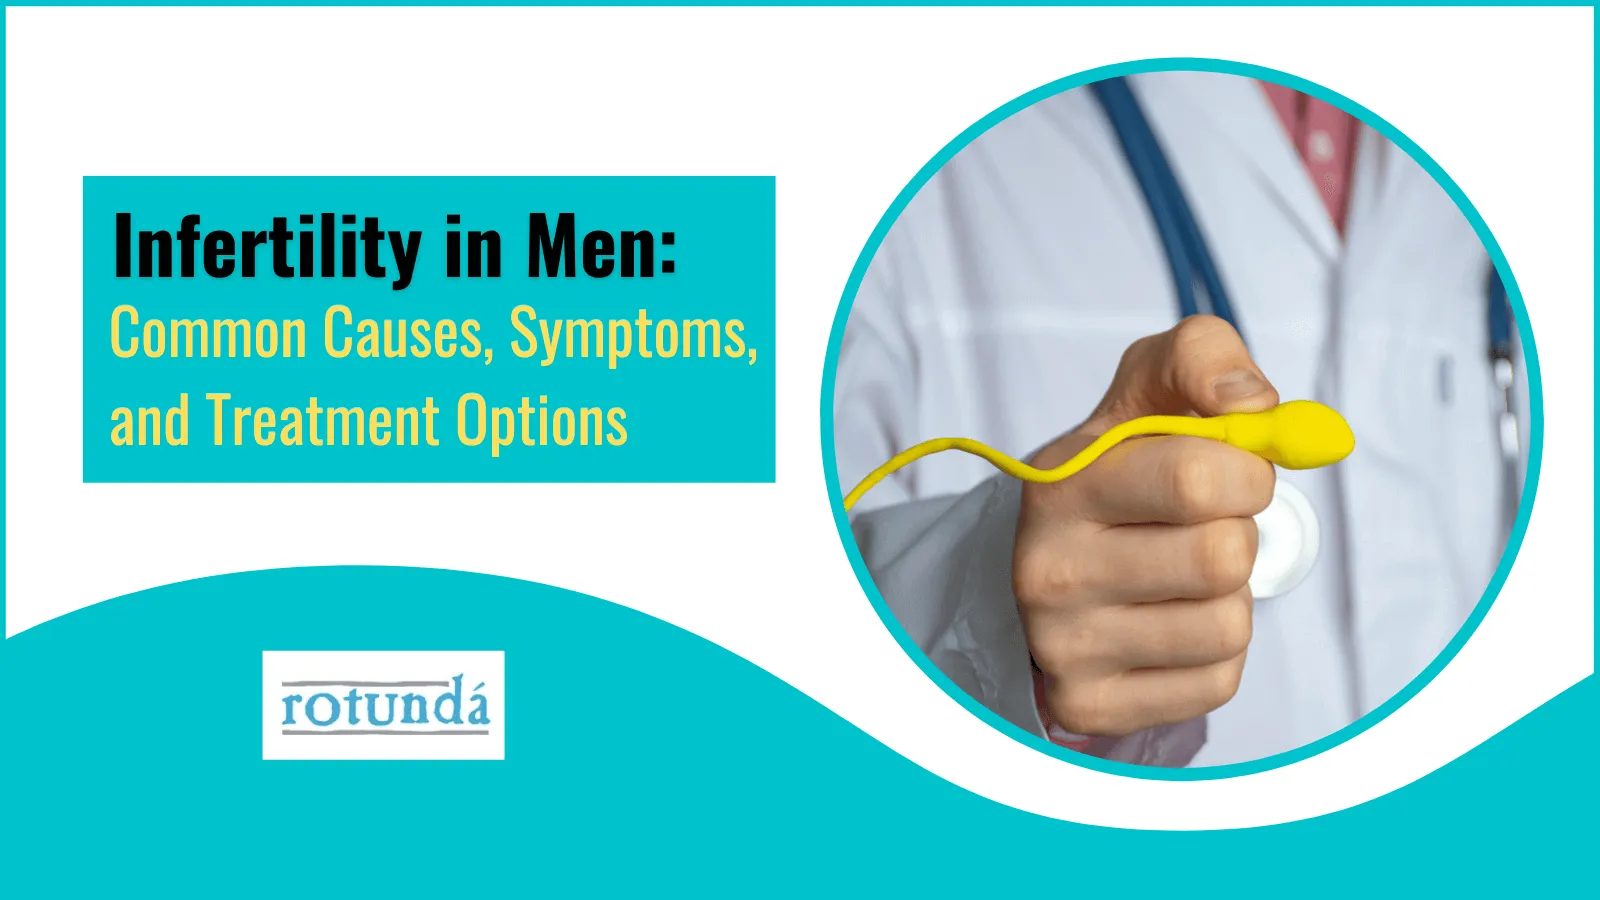 Infertility in Men: Common Causes, Symptoms, and Treatment Options